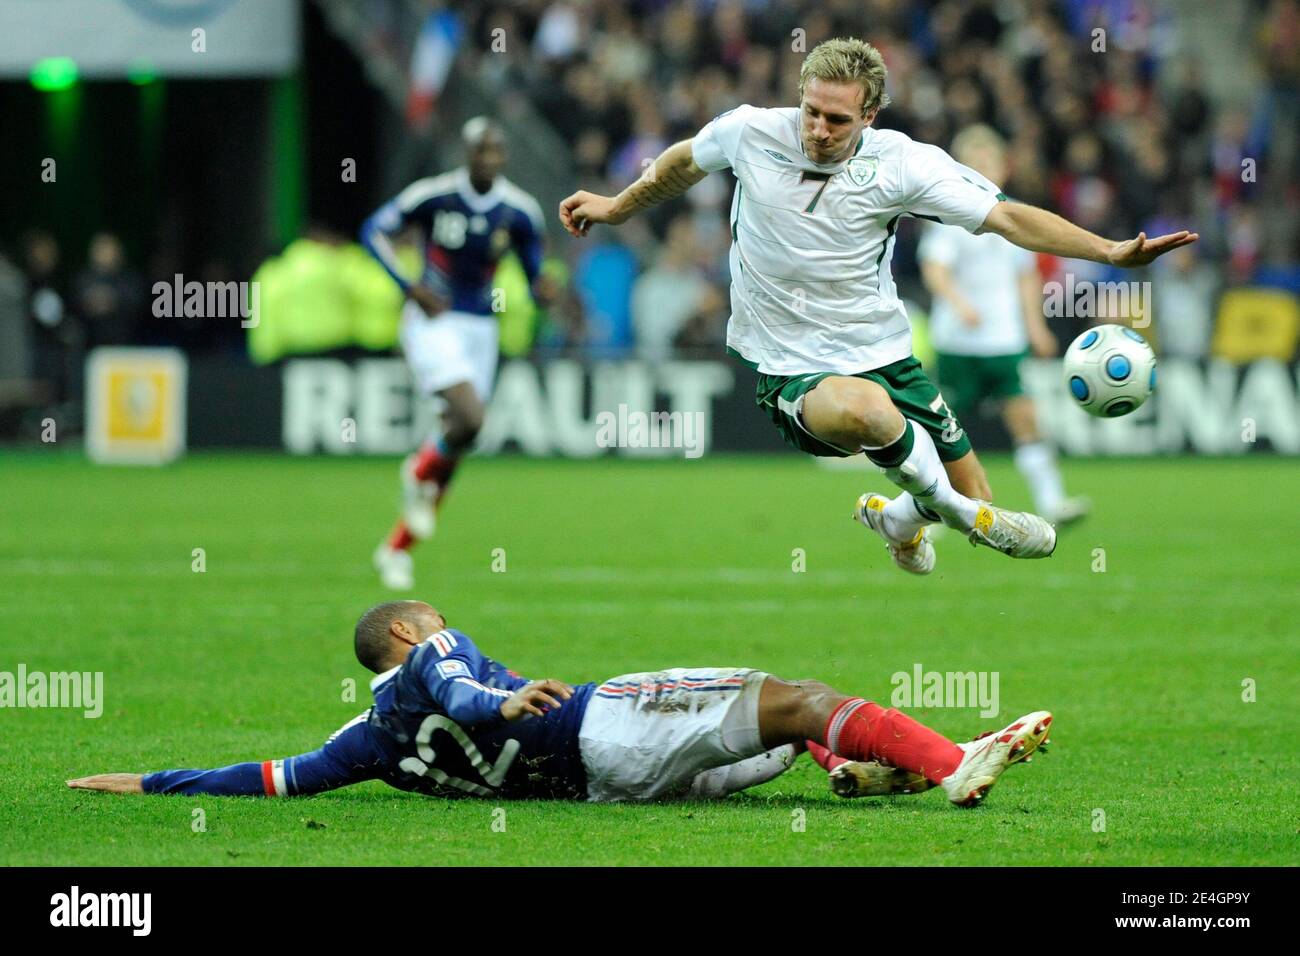 France's Thierry Henry battles Republic of Ireland's Liam Lawrence during World Cup Play-off soccer match, France vs Republic of Ireland in Stade de France, Saint-Denis,, France, on November 18, 2009. The Match ended in a 1-1 draw. Photo by Philipe Montigny/ABACAPRESS.COM Stock Photo